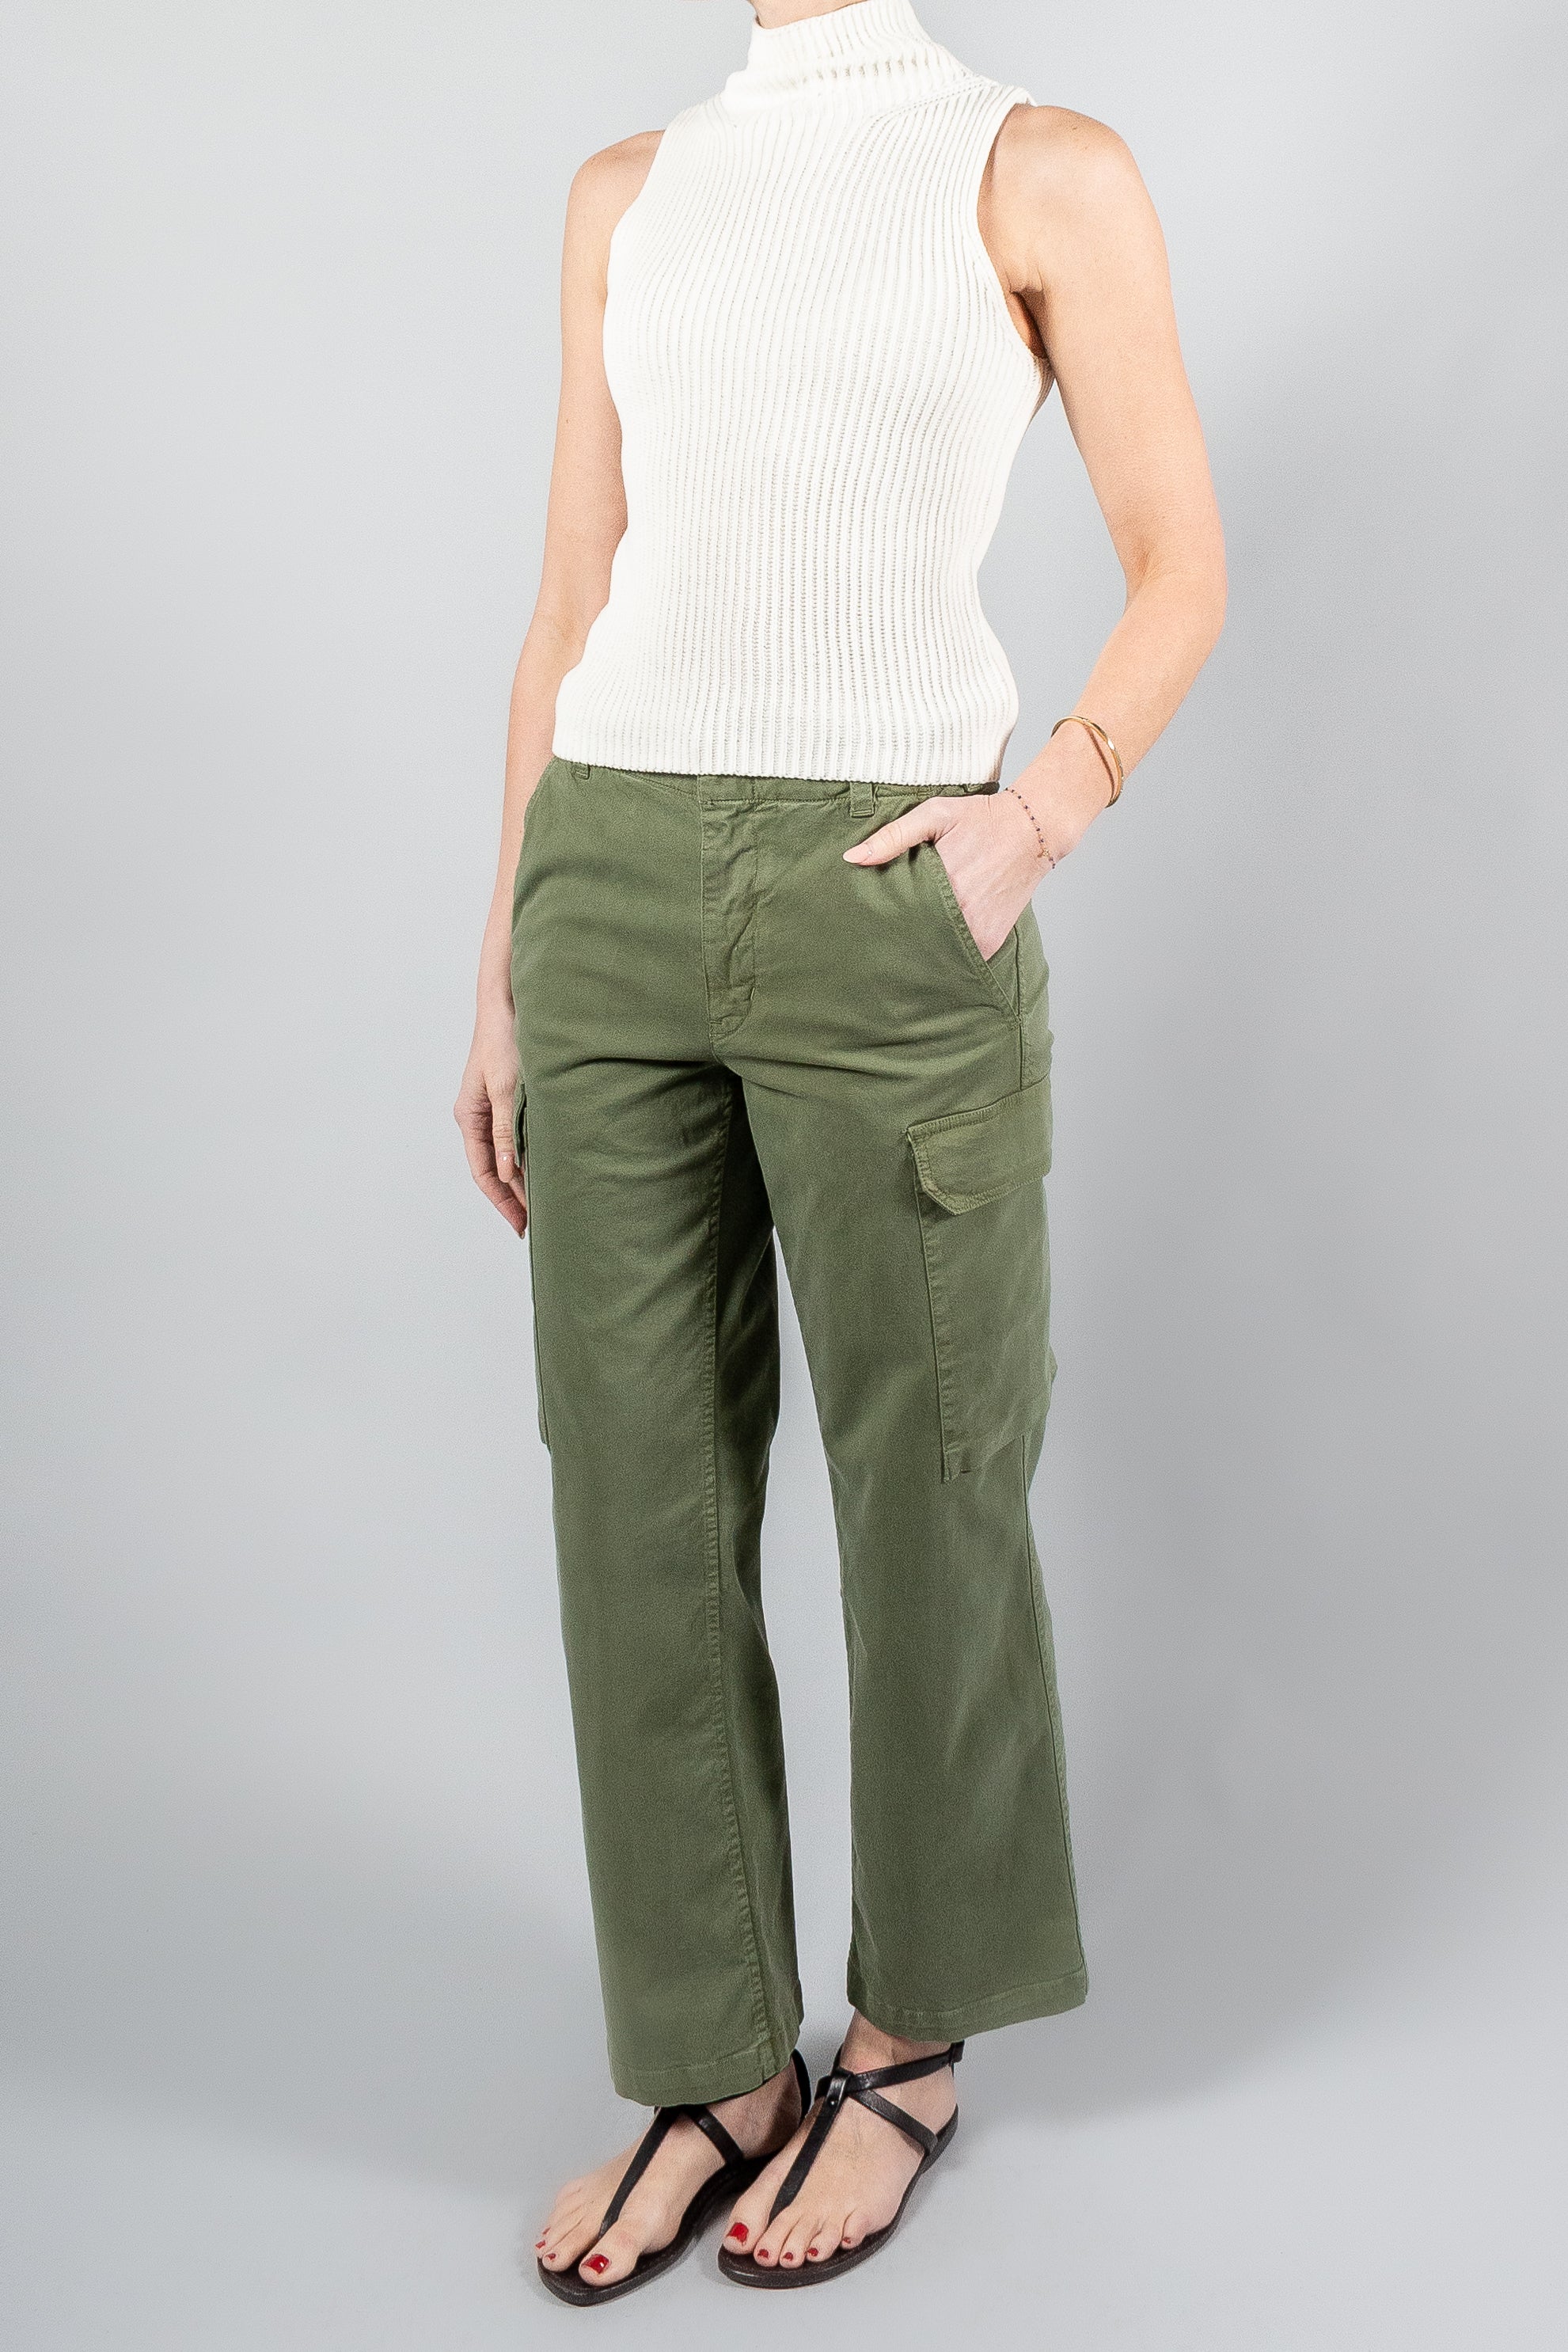 Nili Lotan Leofred Cargo Pant-Pants and Shorts-Misch-Boutique-Vancouver-Canada-misch.ca